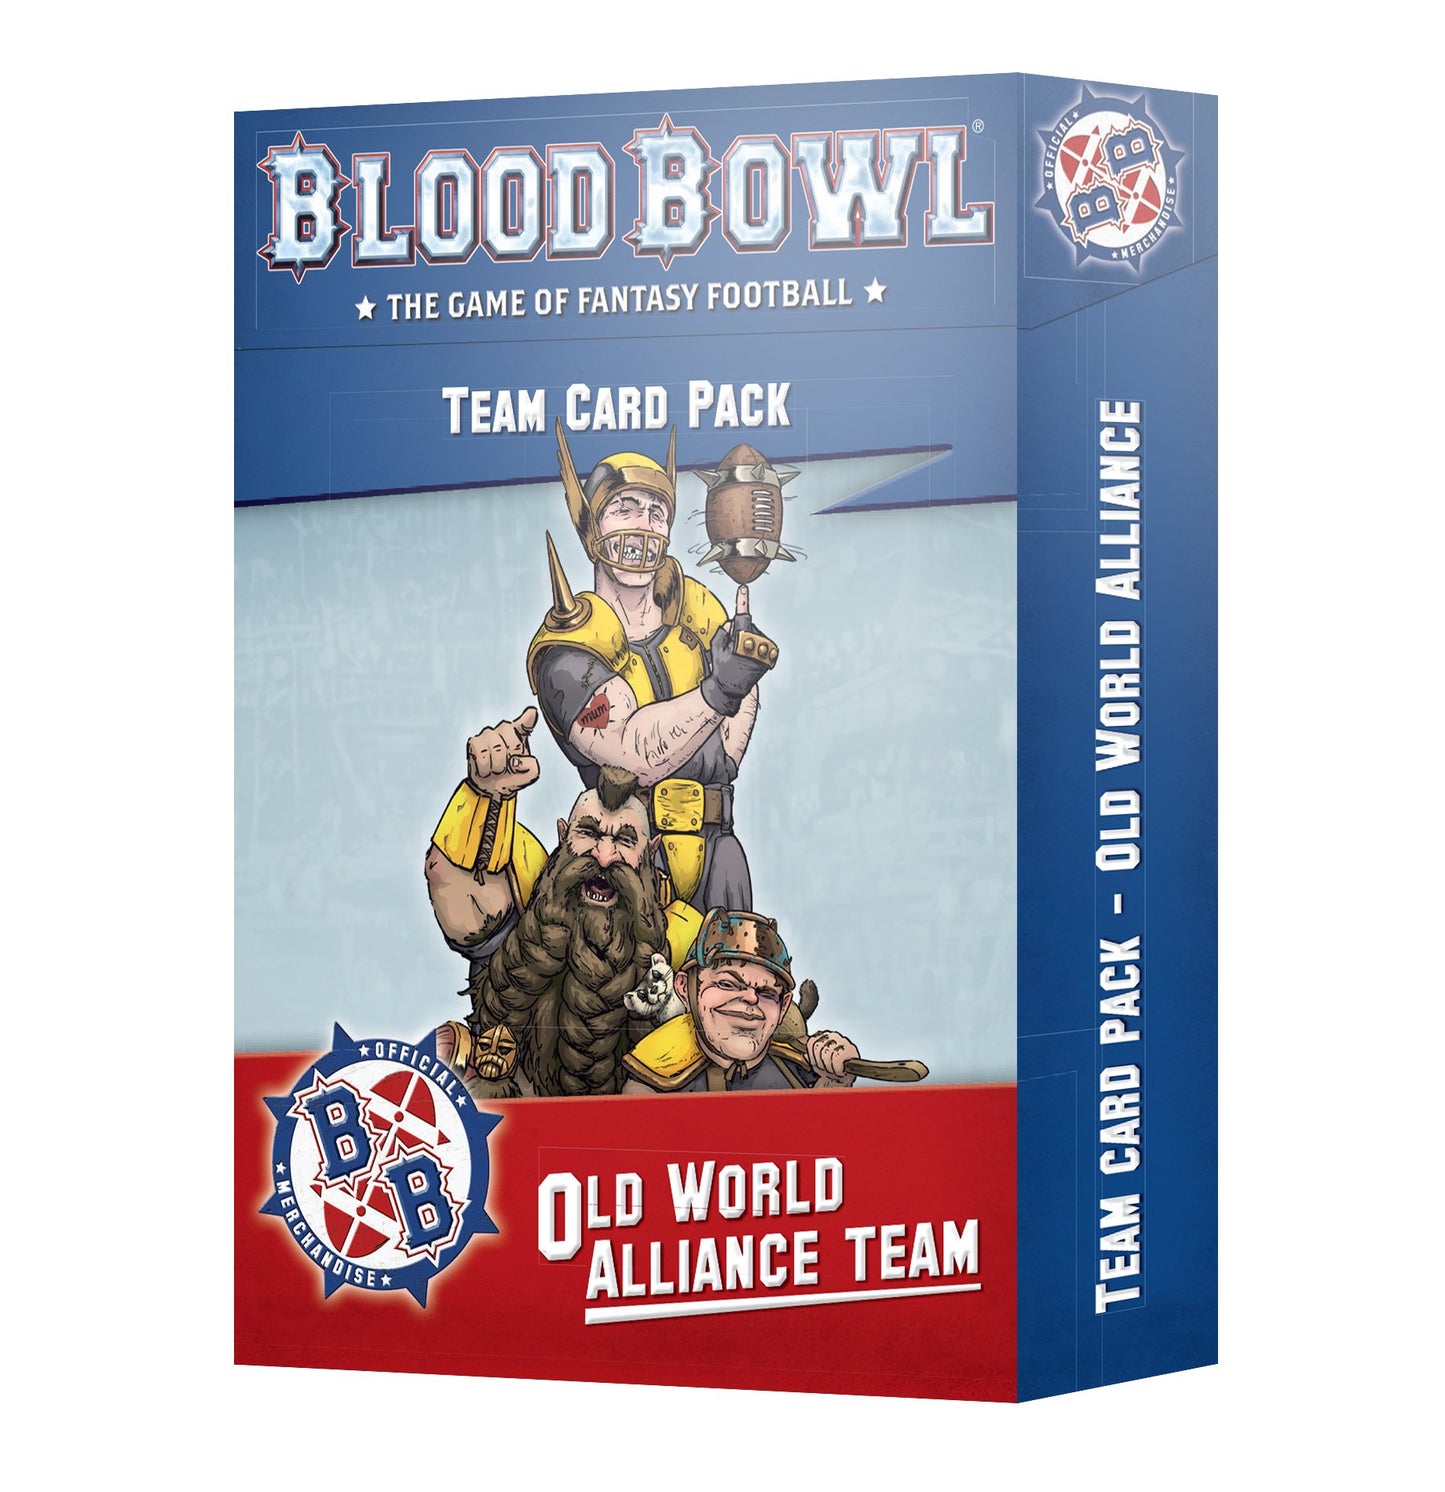 OUT - Blood Bowl: Old World Alliance Team Card Pack